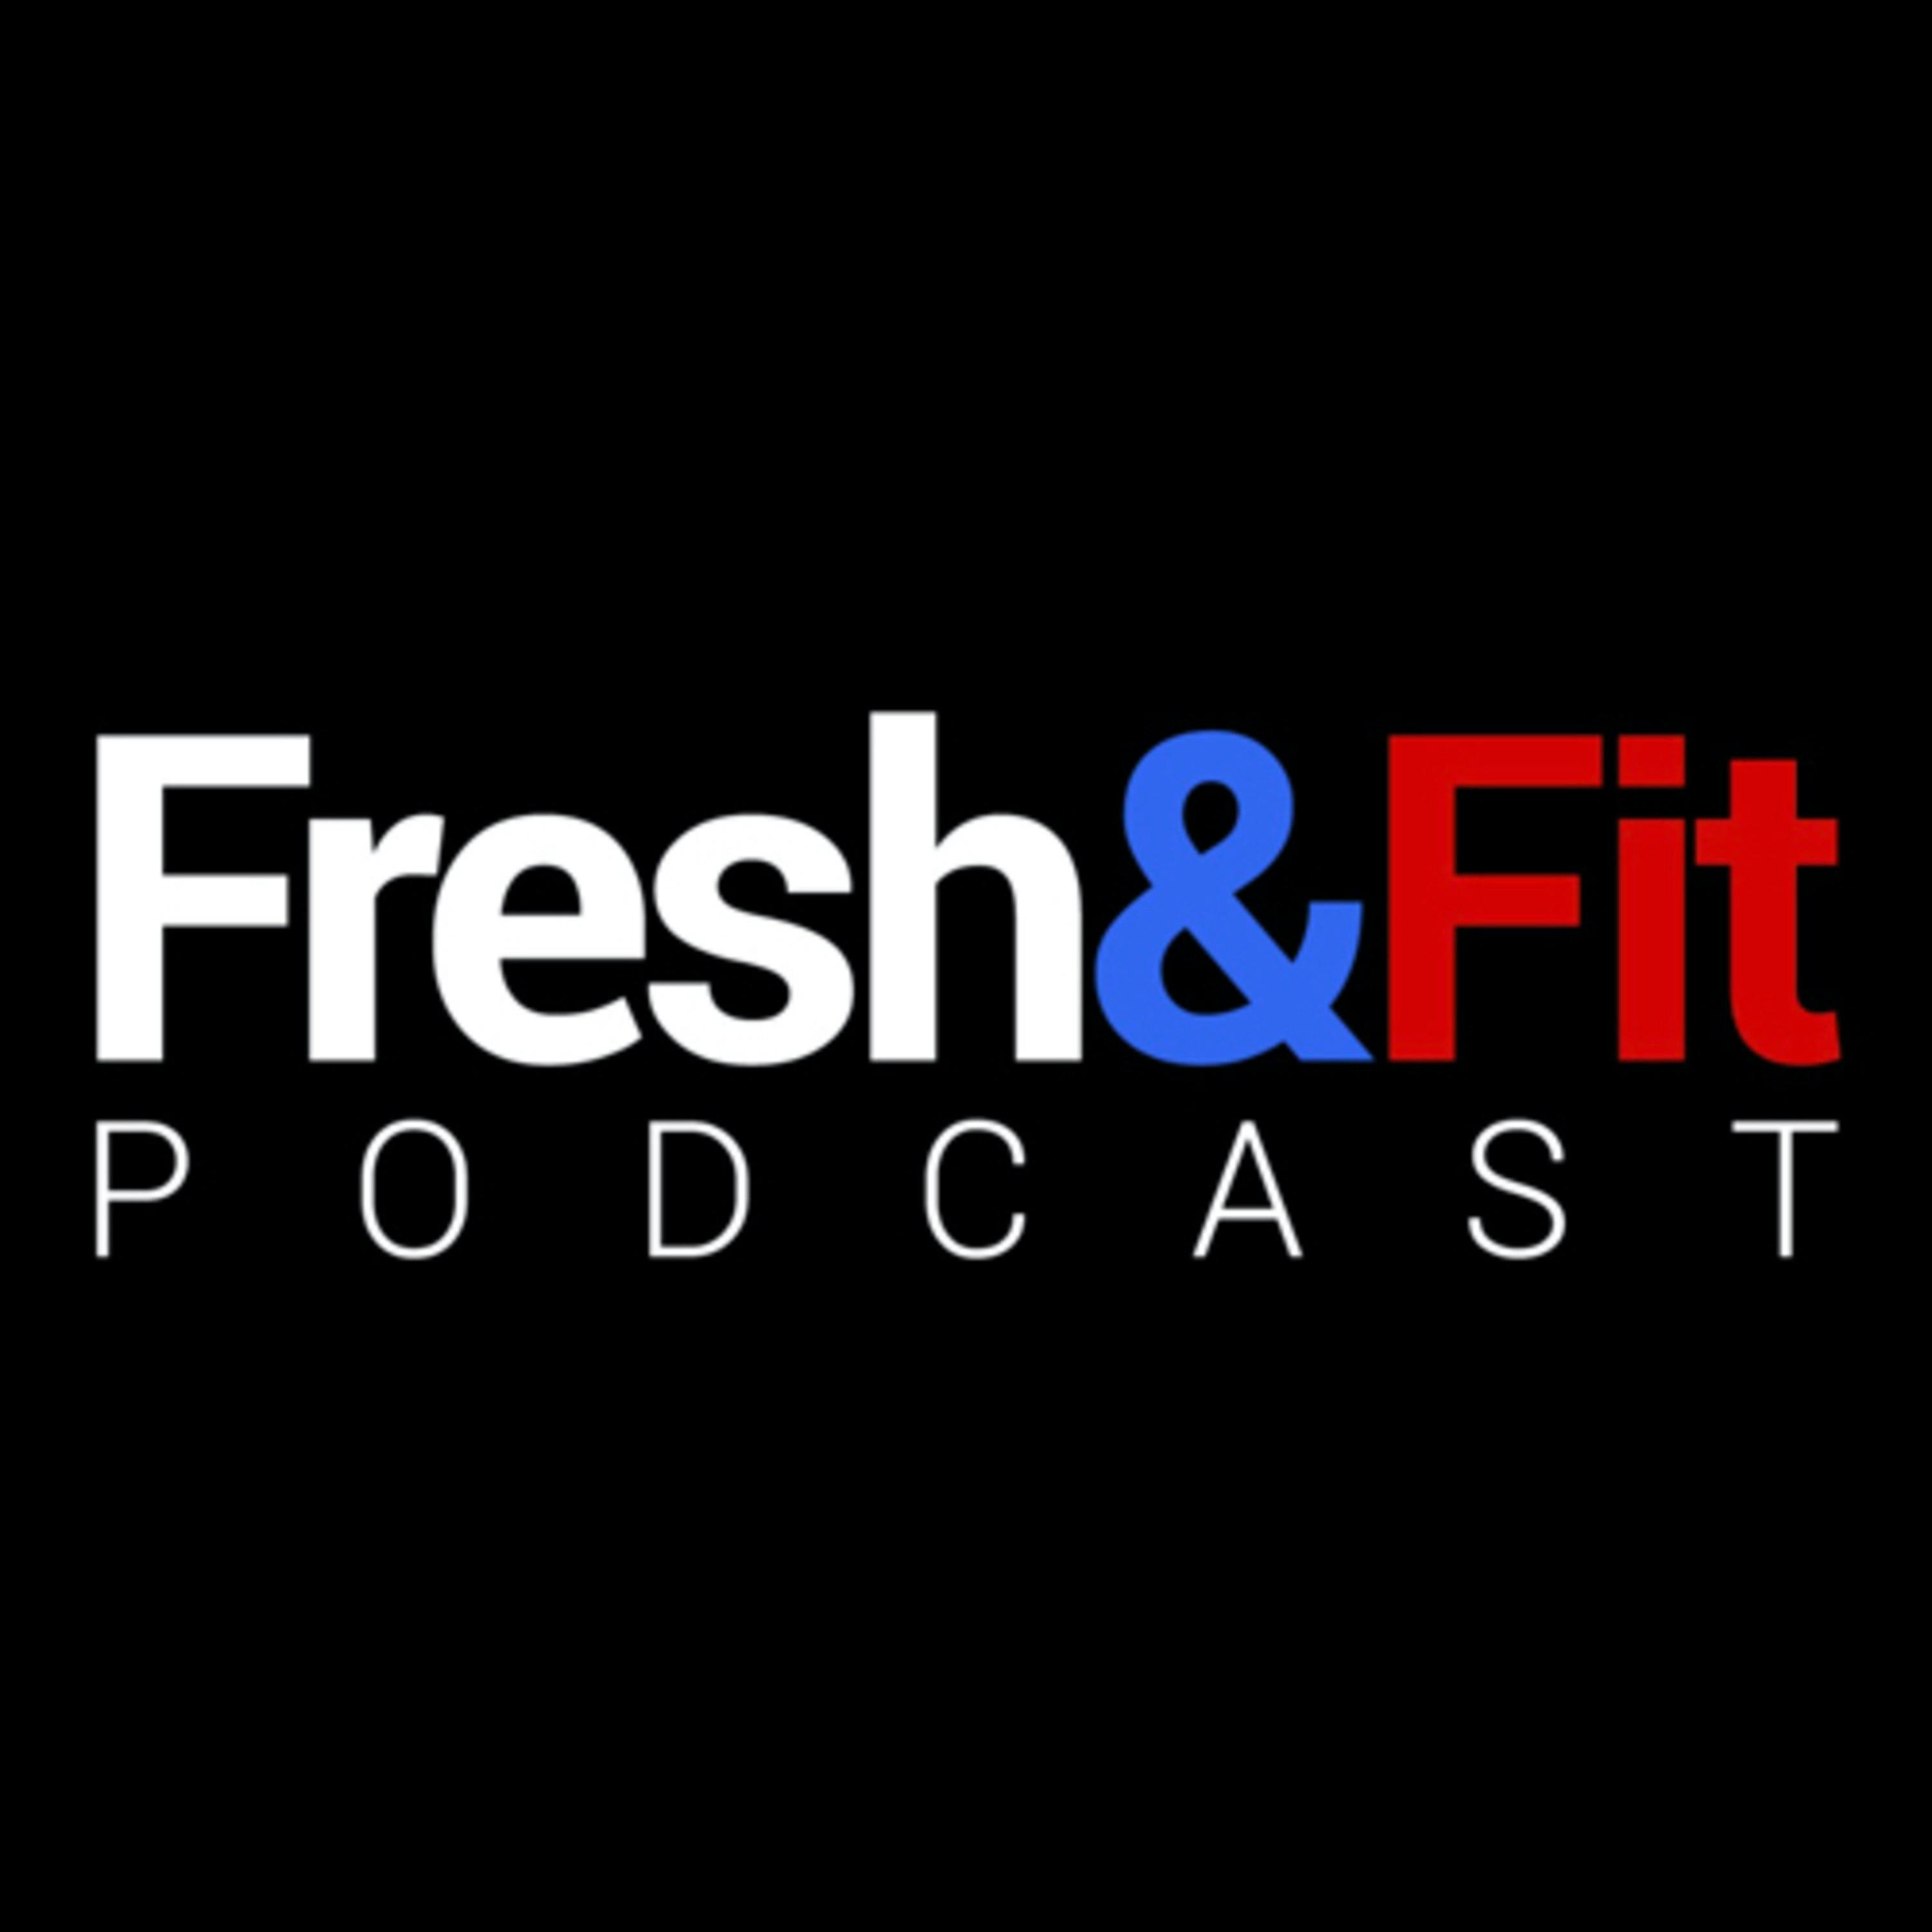 Fresh&Fit Podcast